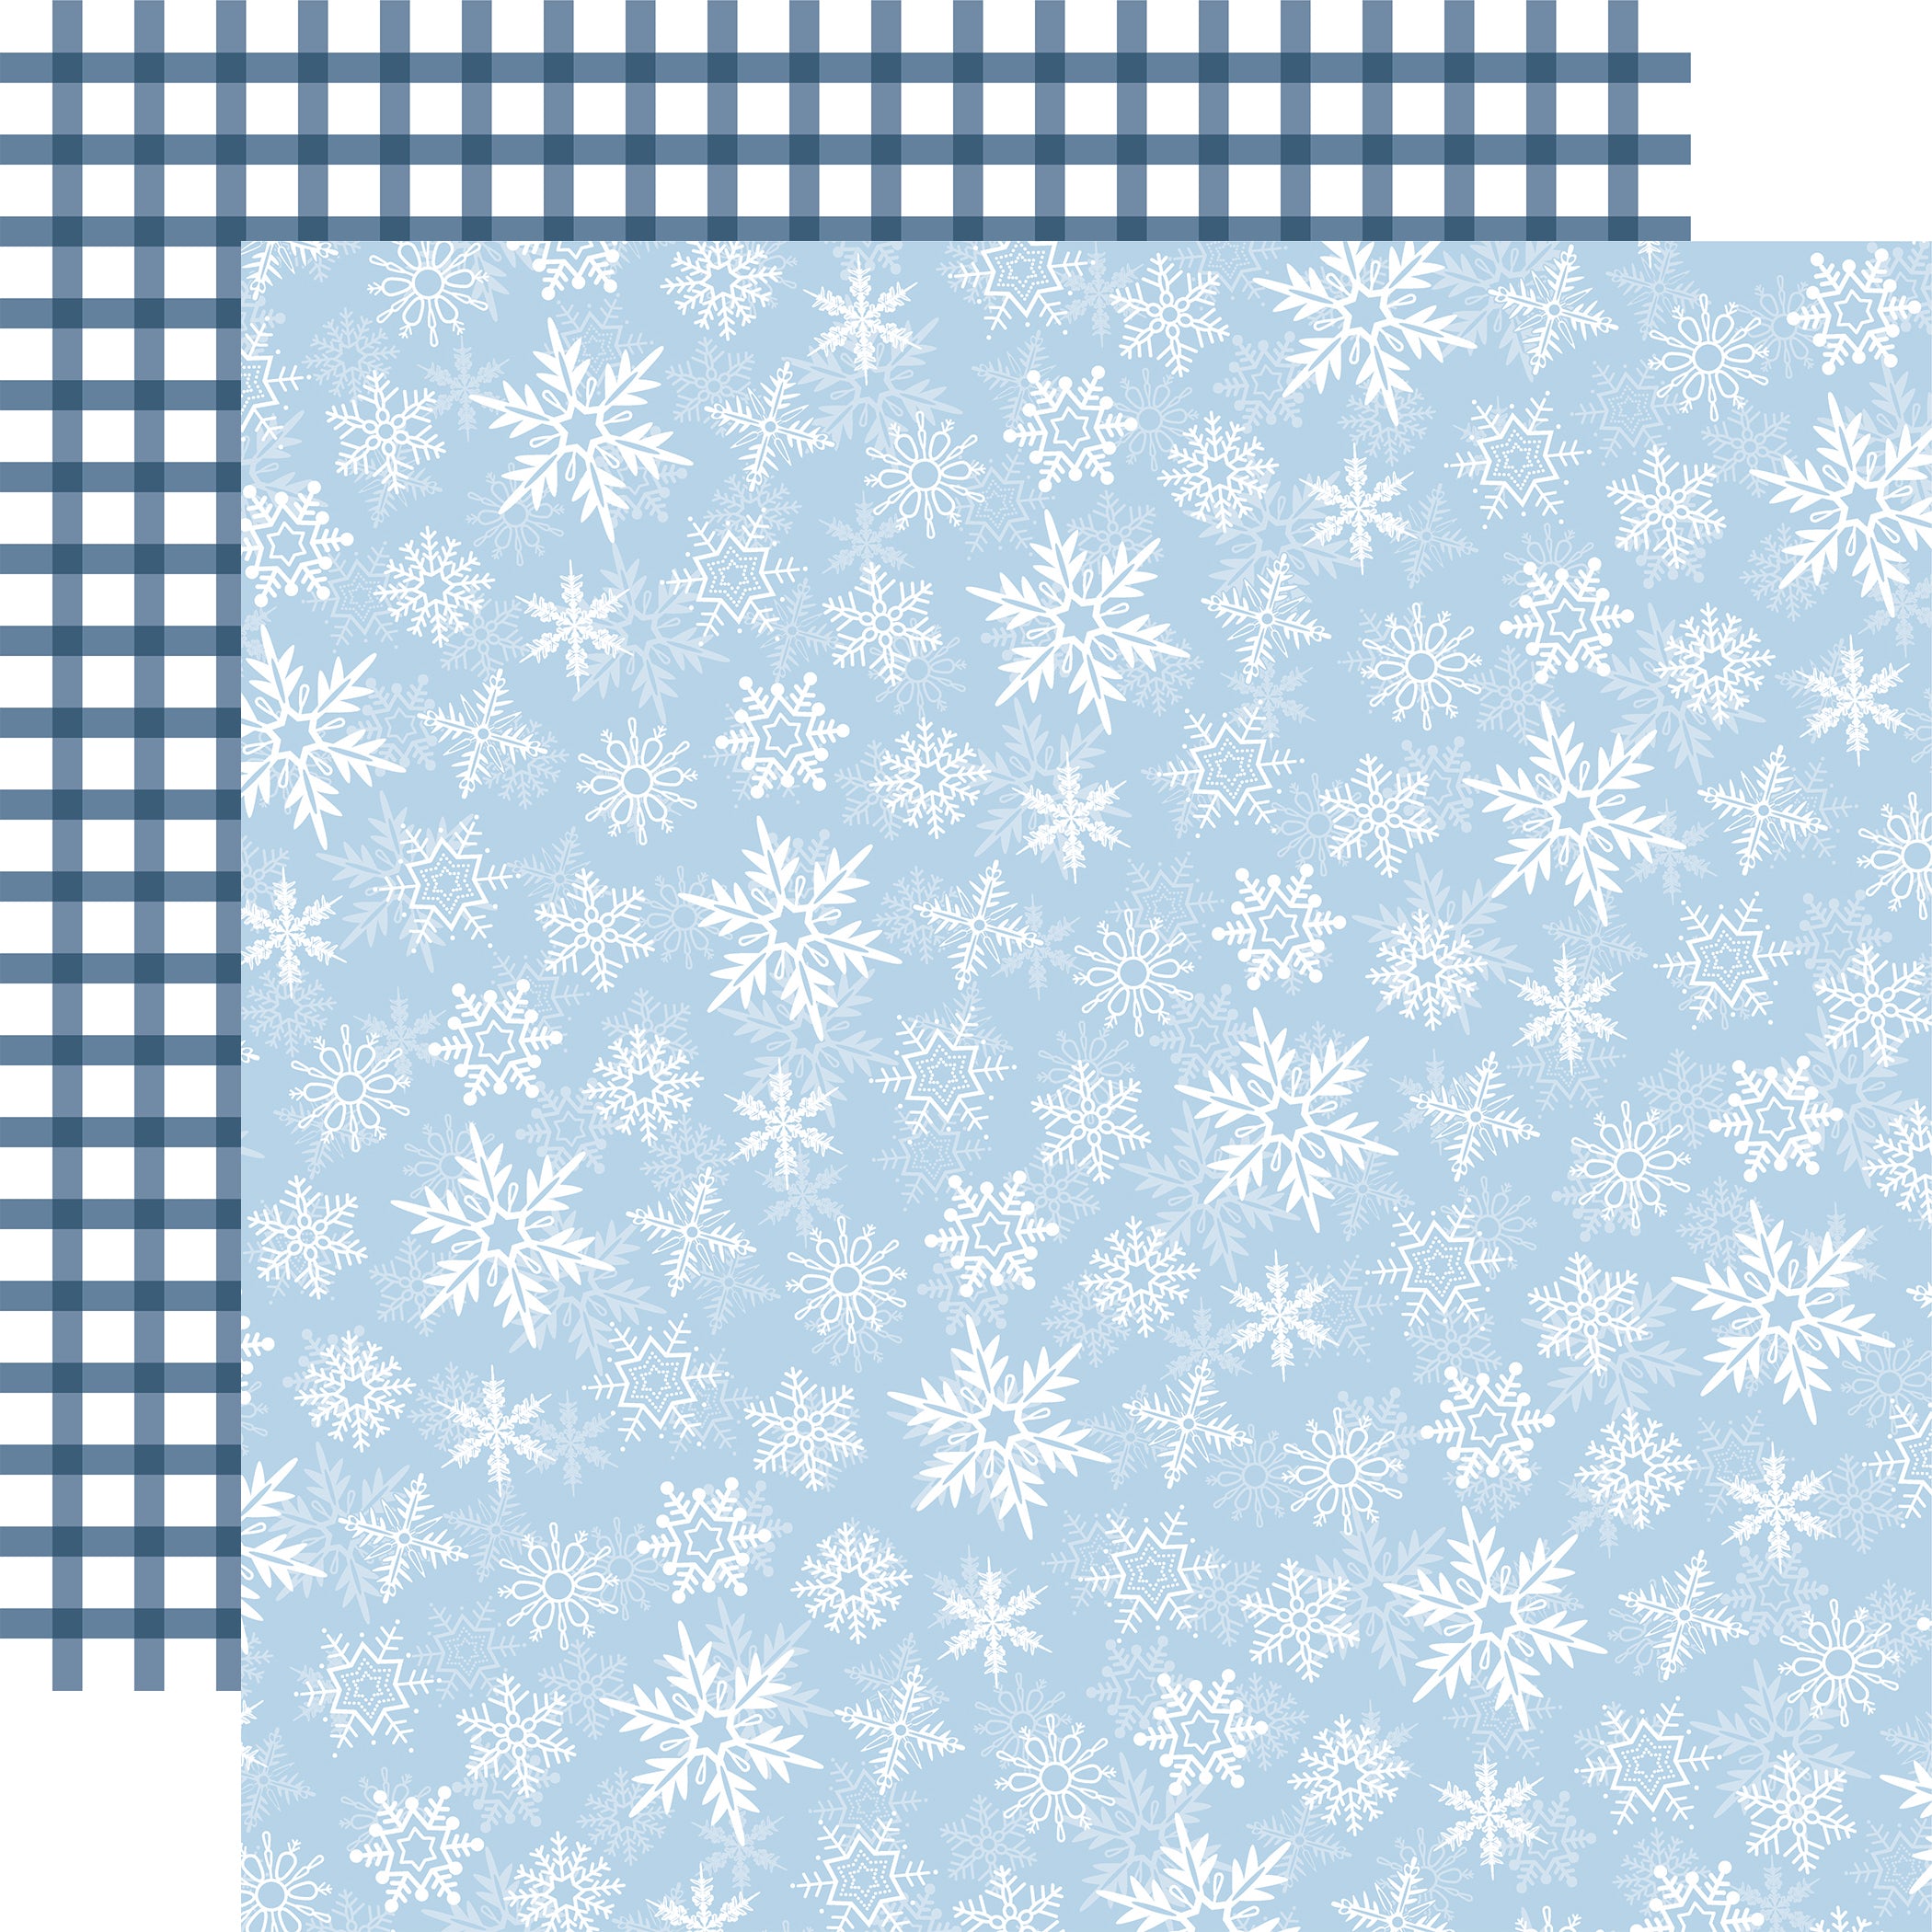 Wintertime Collection Falling Flakes 12 x 12 Double-Sided Scrapbook Paper by Carta Bella